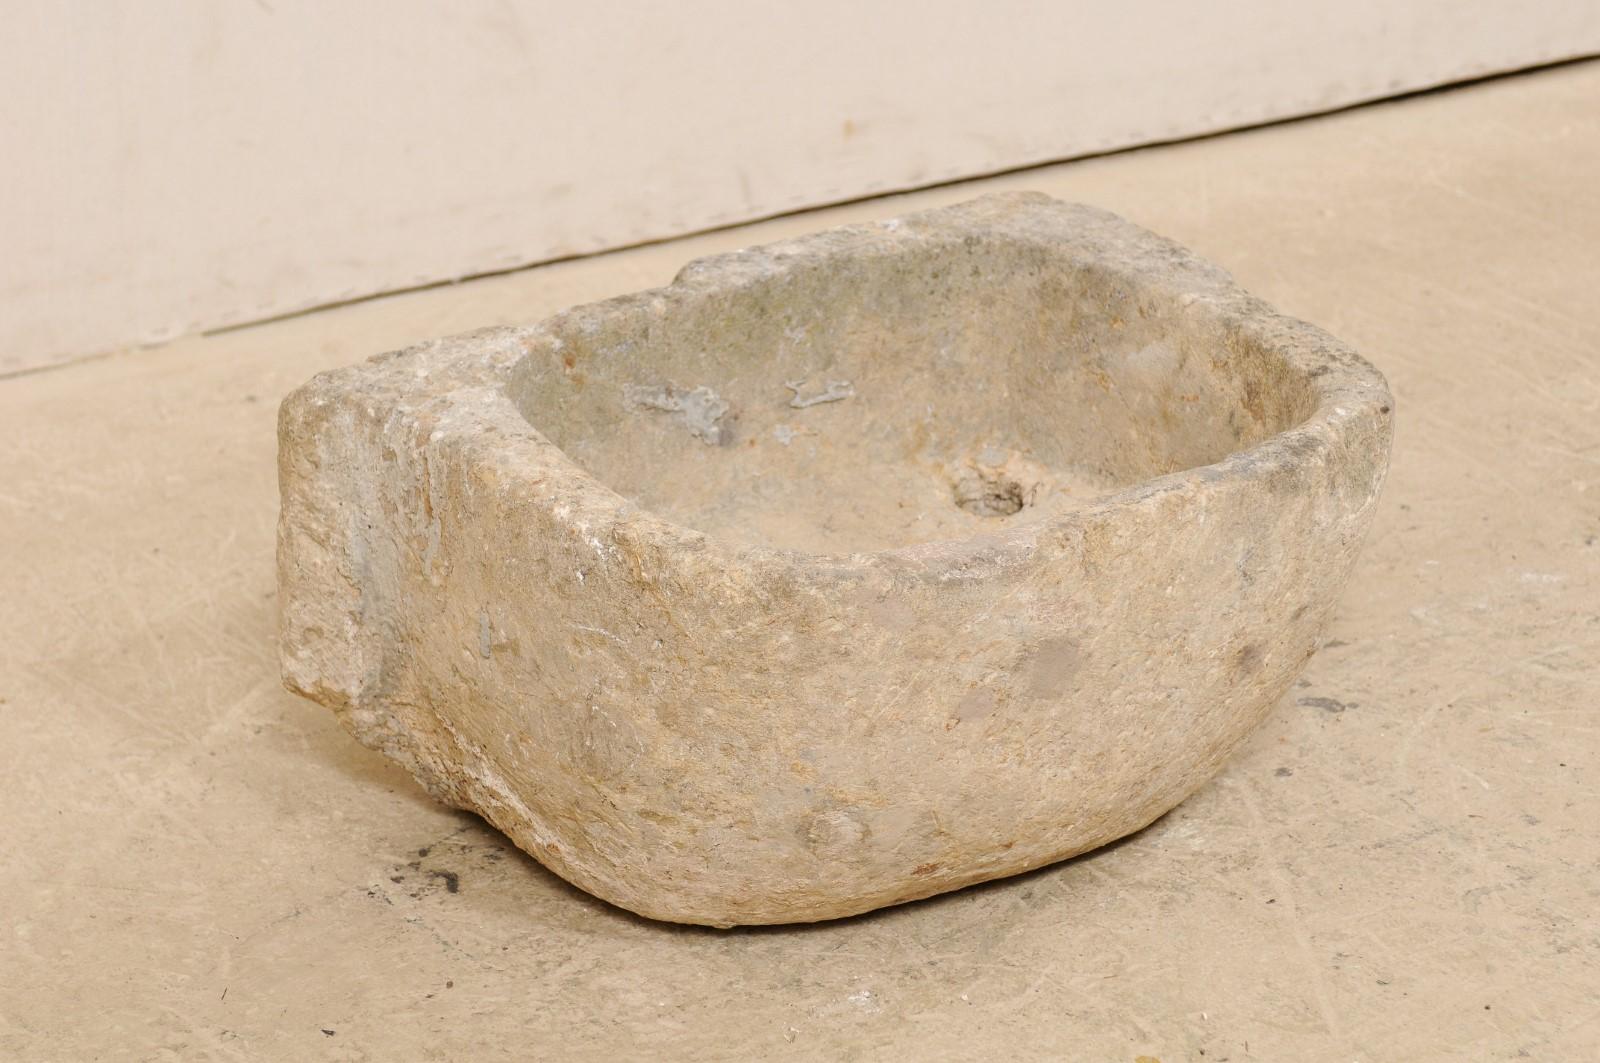 A Spanish limestone sink basin from the 19th century, possibly older. This antique hand carved limestone sink from Spain has a rounded front with flat backside, giving it an overall 